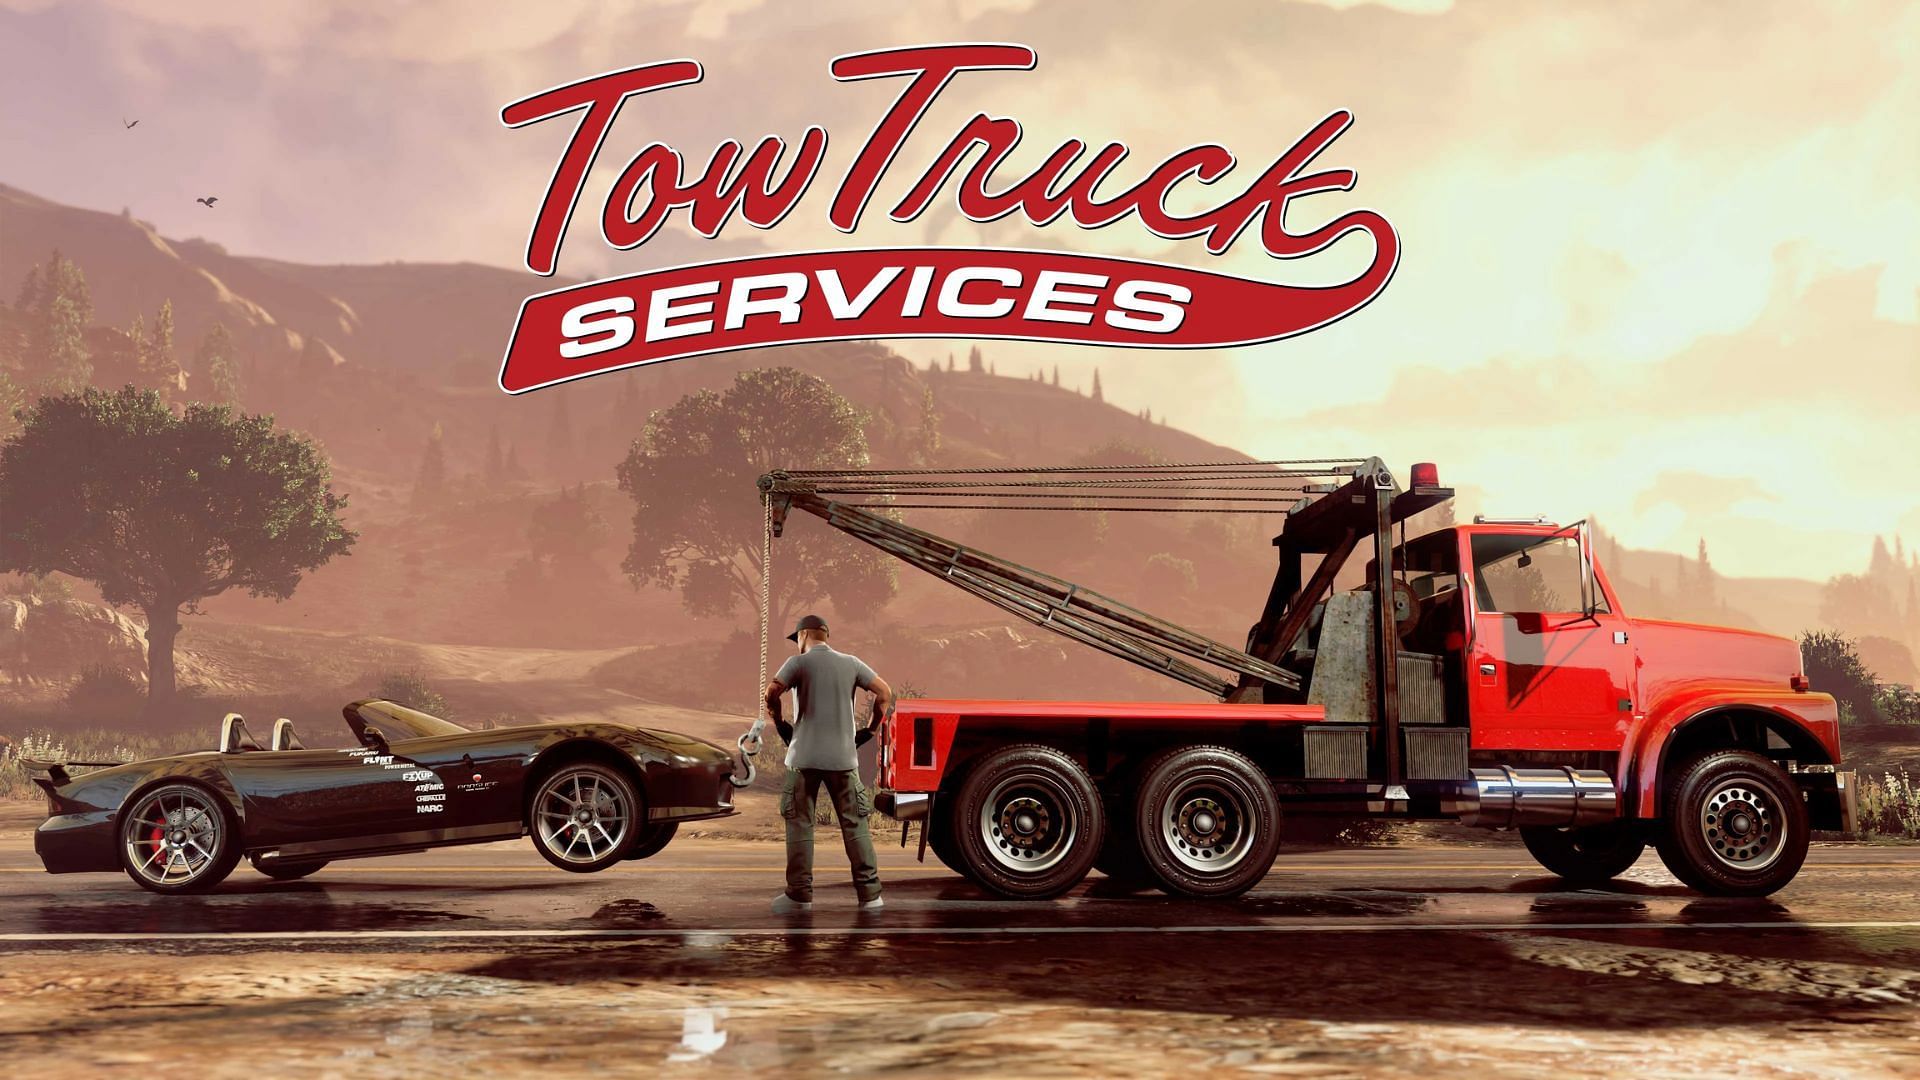 The official poster for the Tow Truck Service in Grand Theft Auto Online (Image via Rockstar Games)